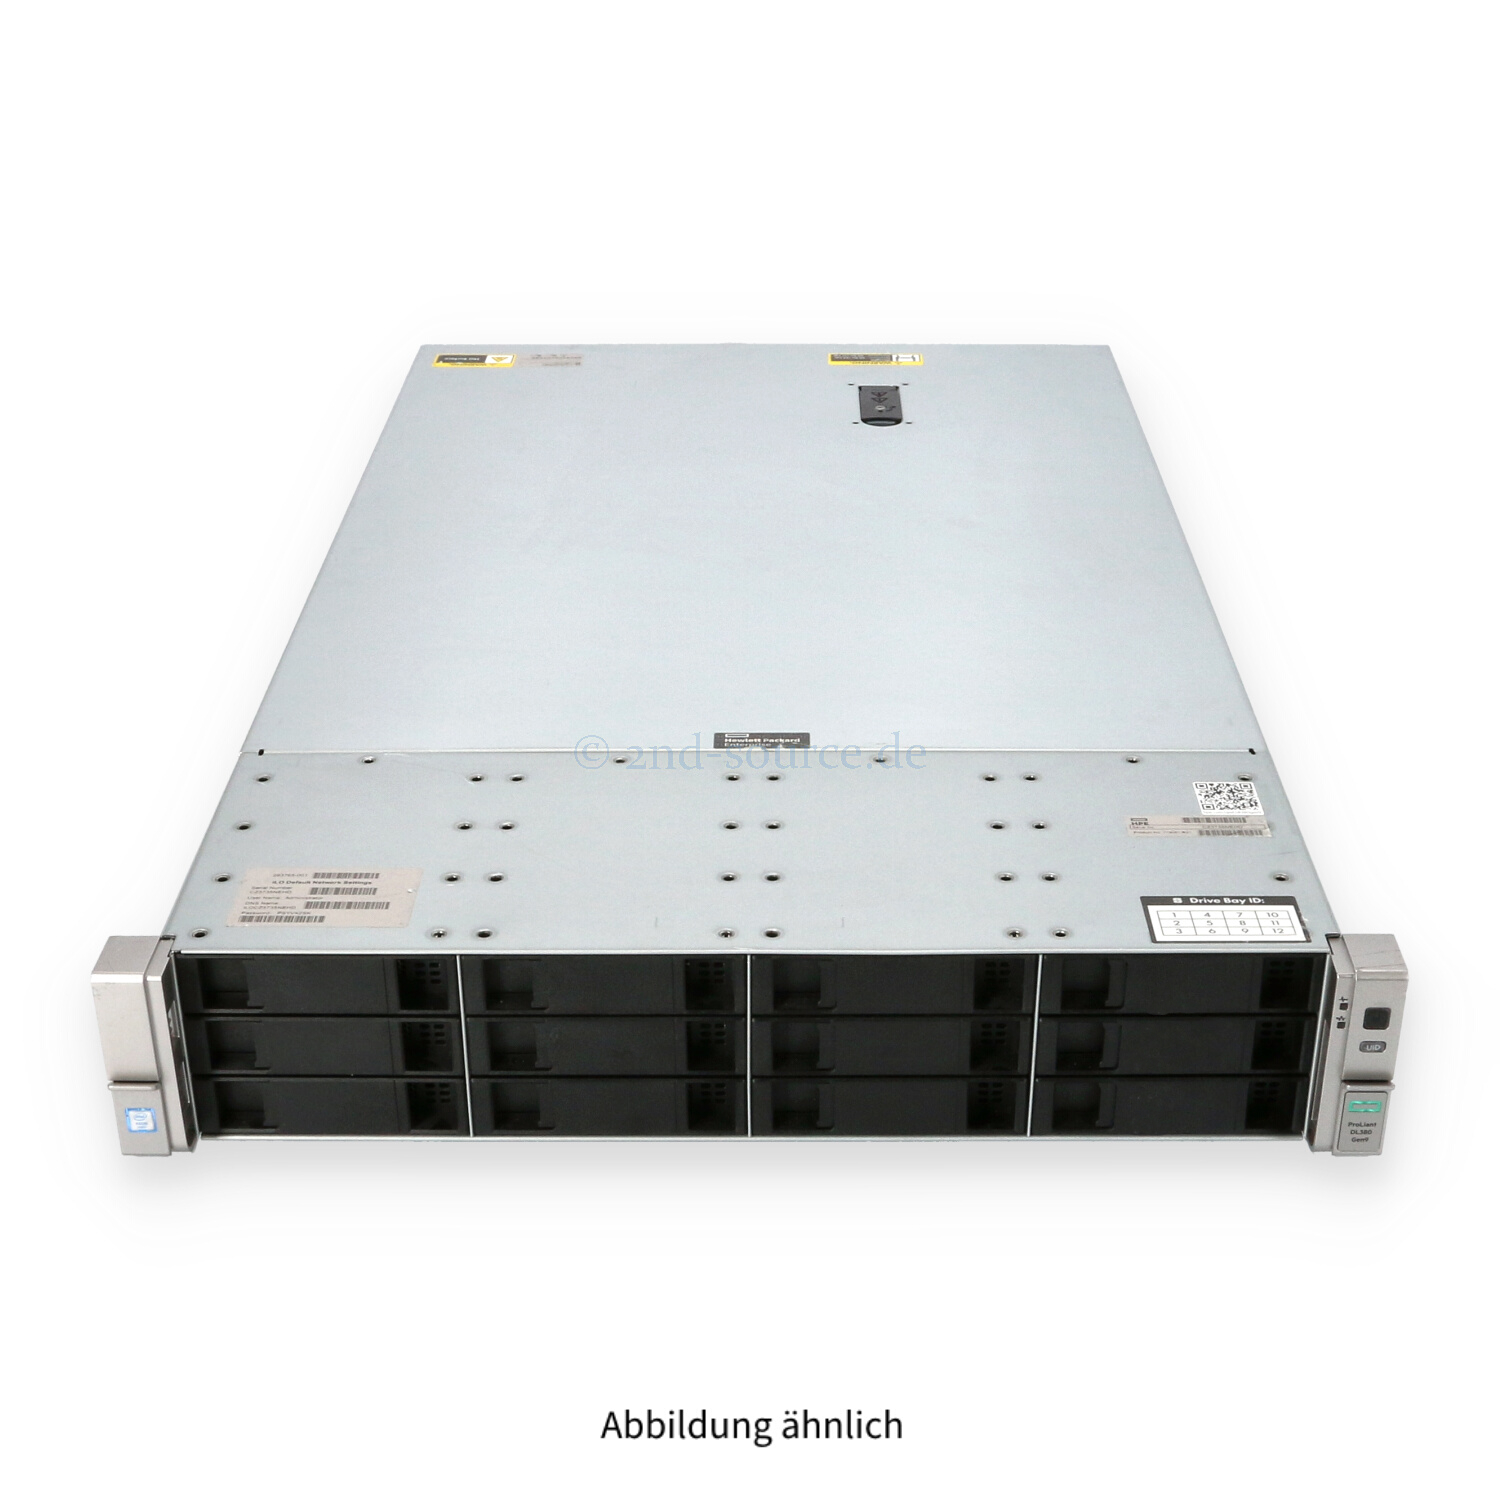 HPE DL380 G9 12xLFF 2xSFF P440ar/2GB Expander CTO Chassis 719061-B21